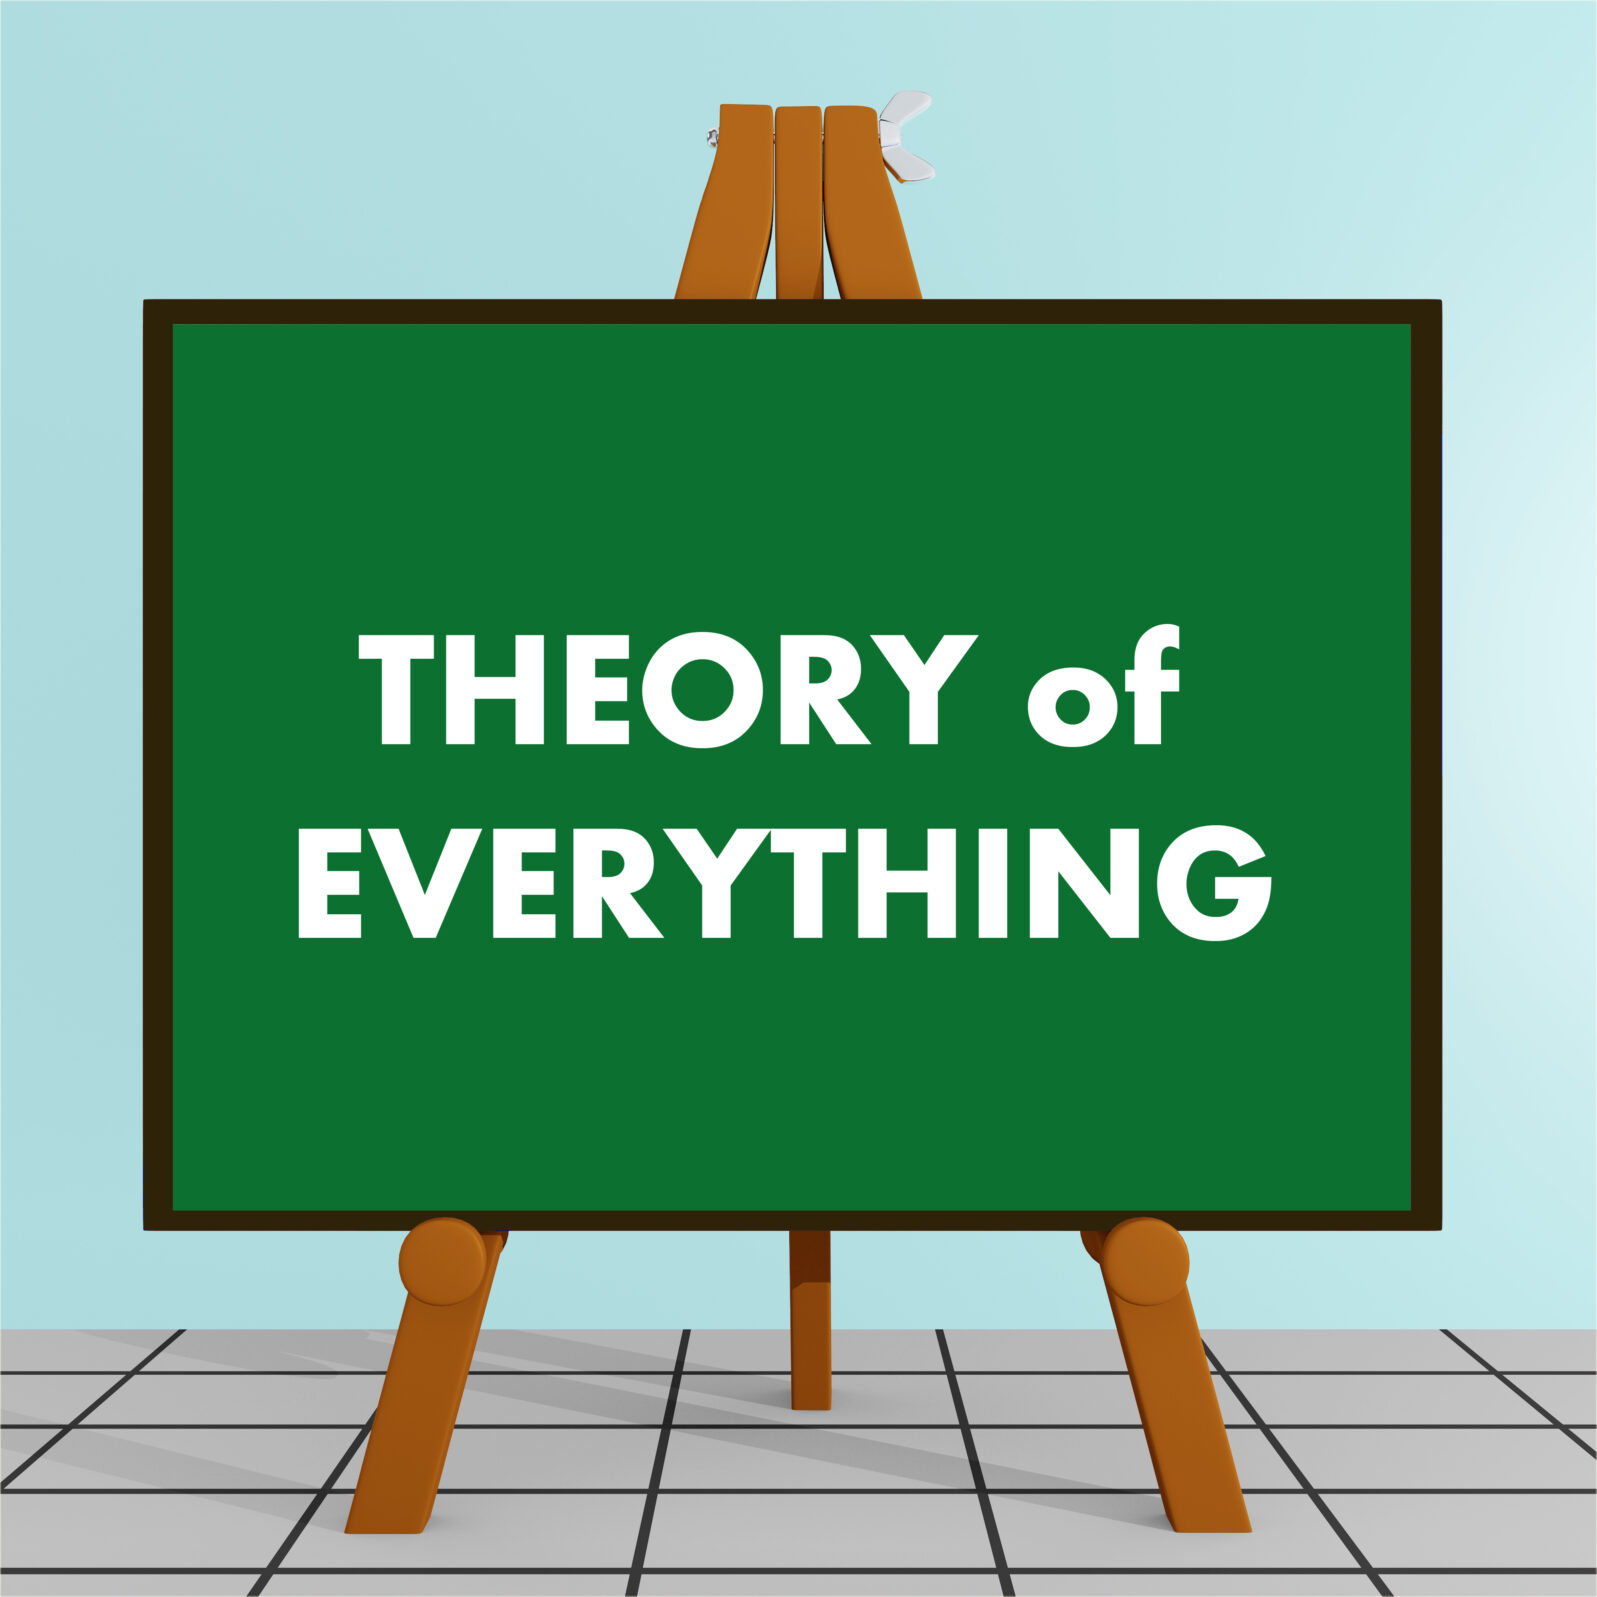 Theory of Everything concept